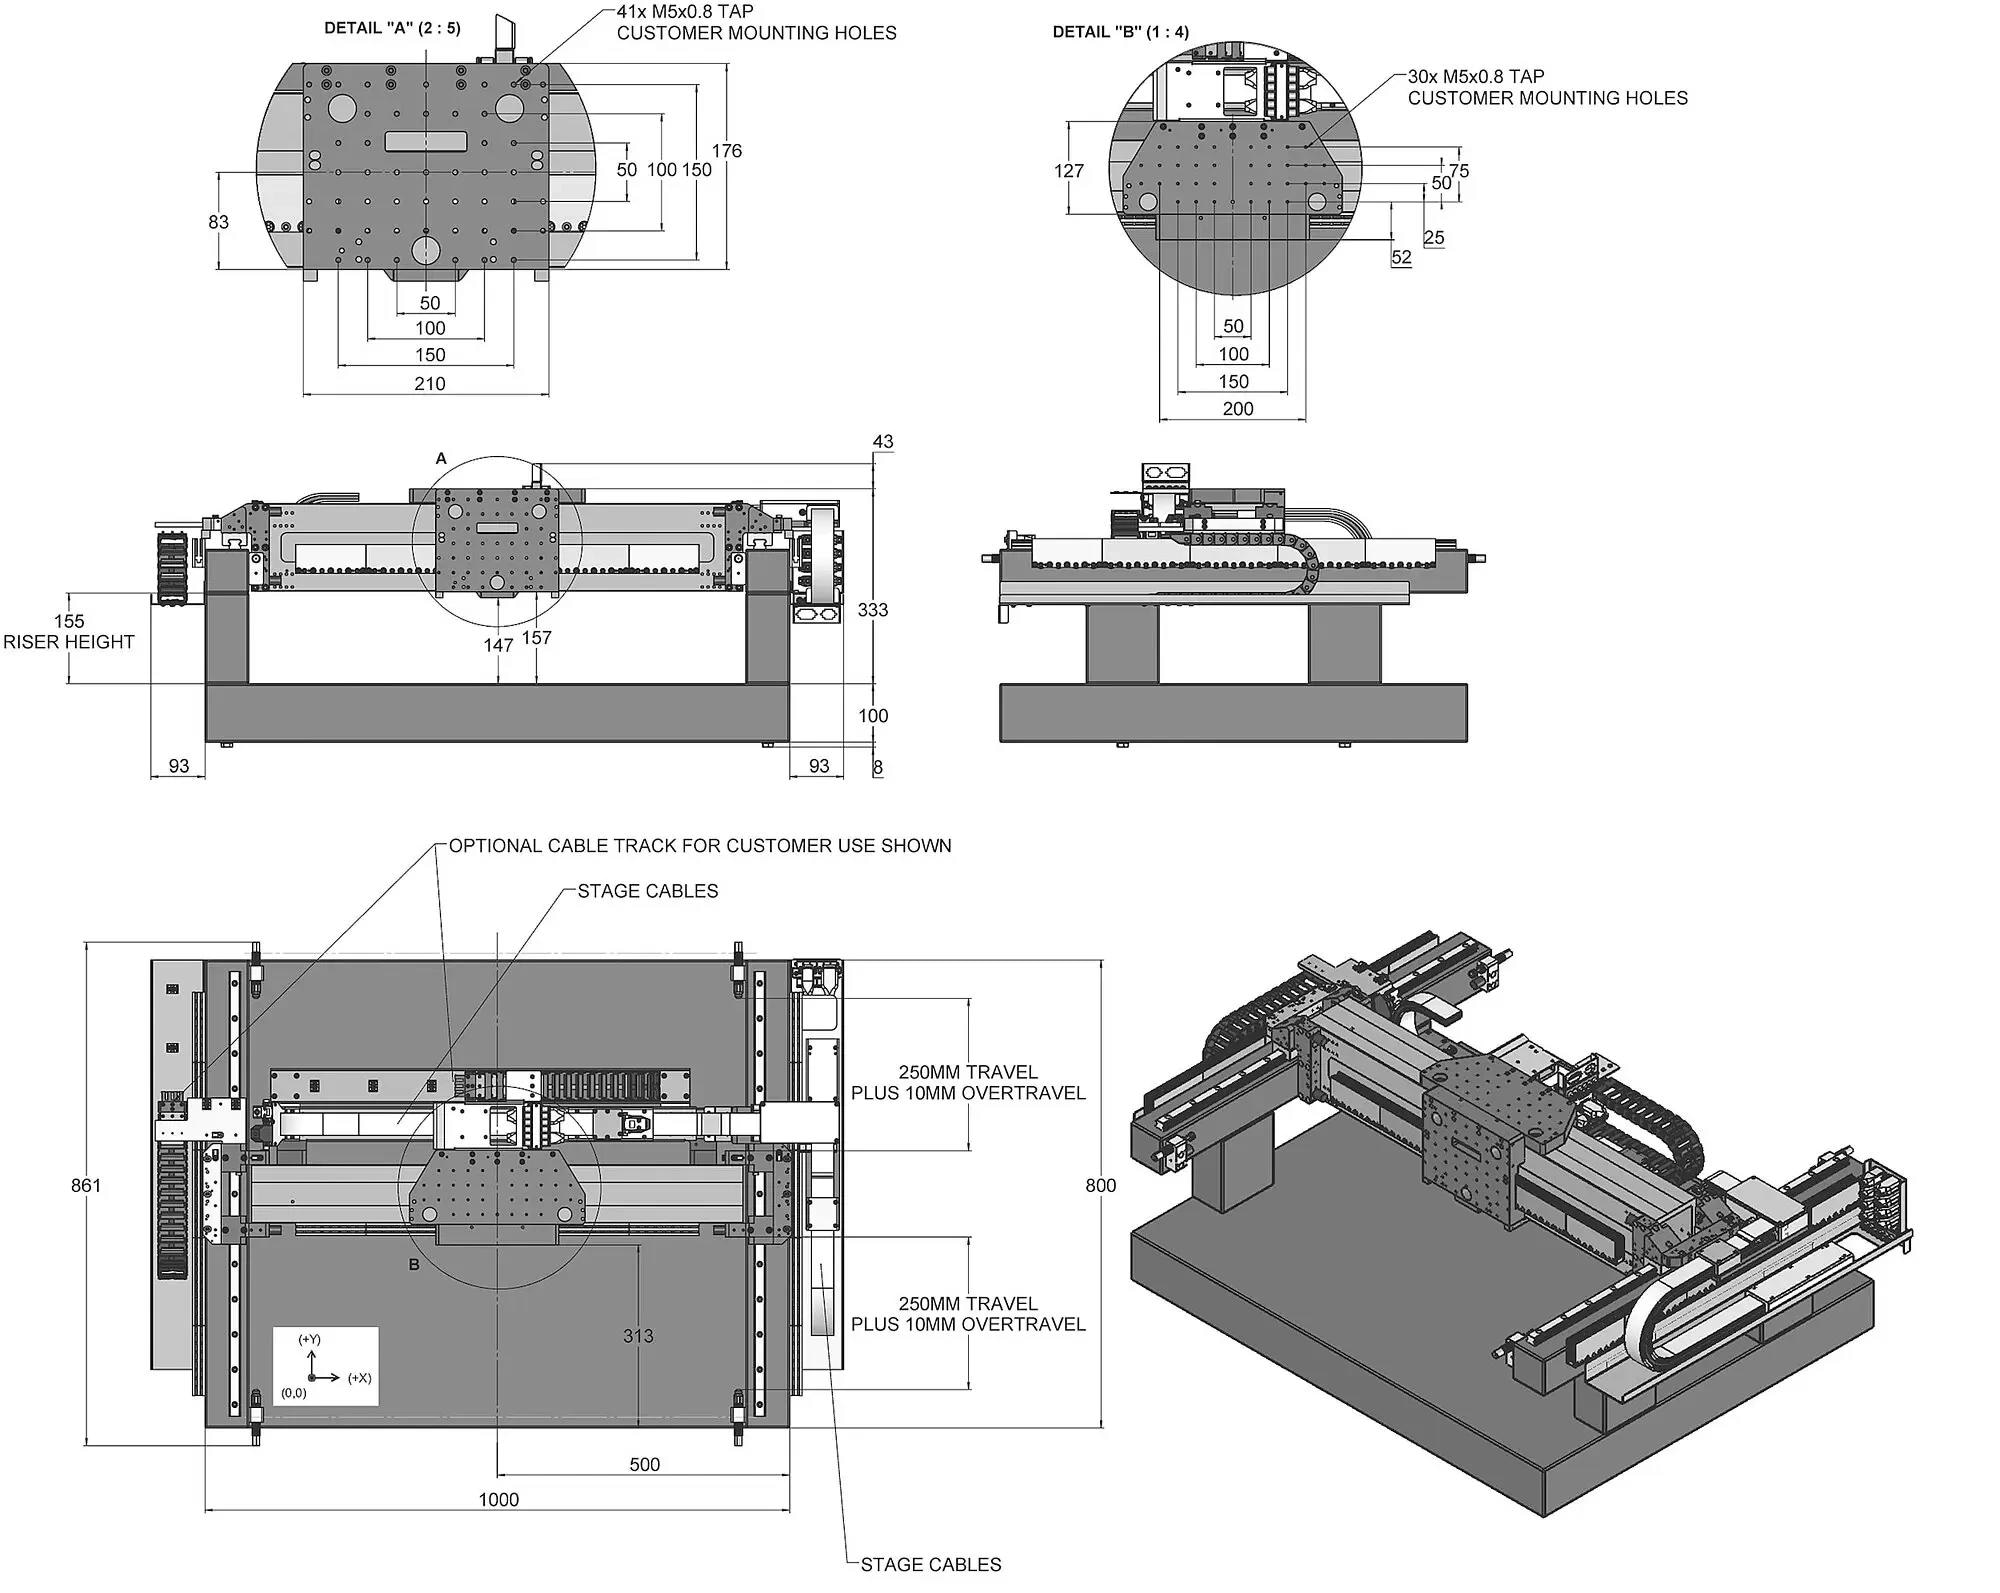 A-341 gantry system, dimensions in mm.